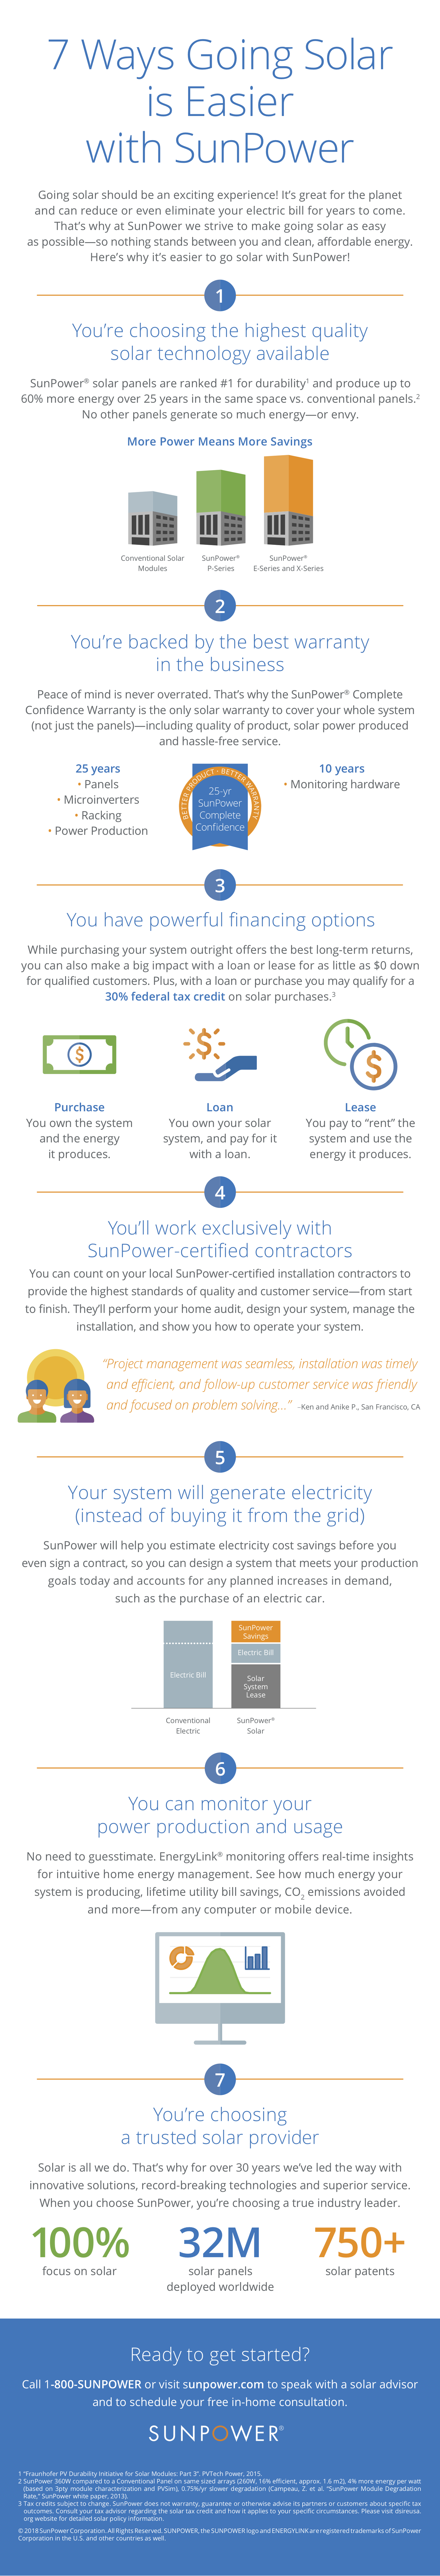 INFOGRAPHIC_RESI-358_7-ways-going-solar-is-easy_Infographic_28SEPT18 V6.png